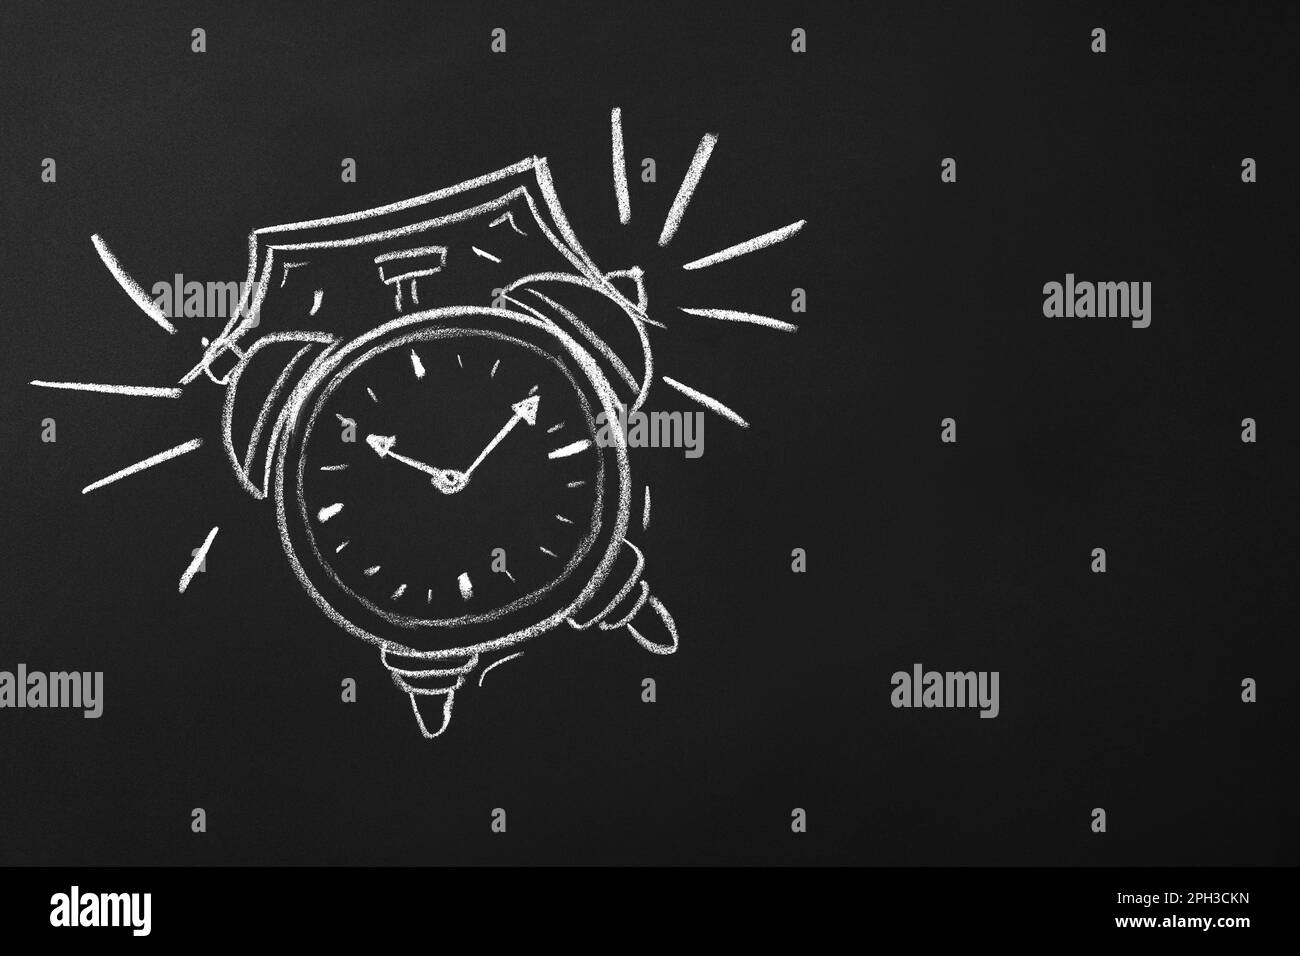 Drawn alarm clock on blackboard, space for text. School time Stock Photo